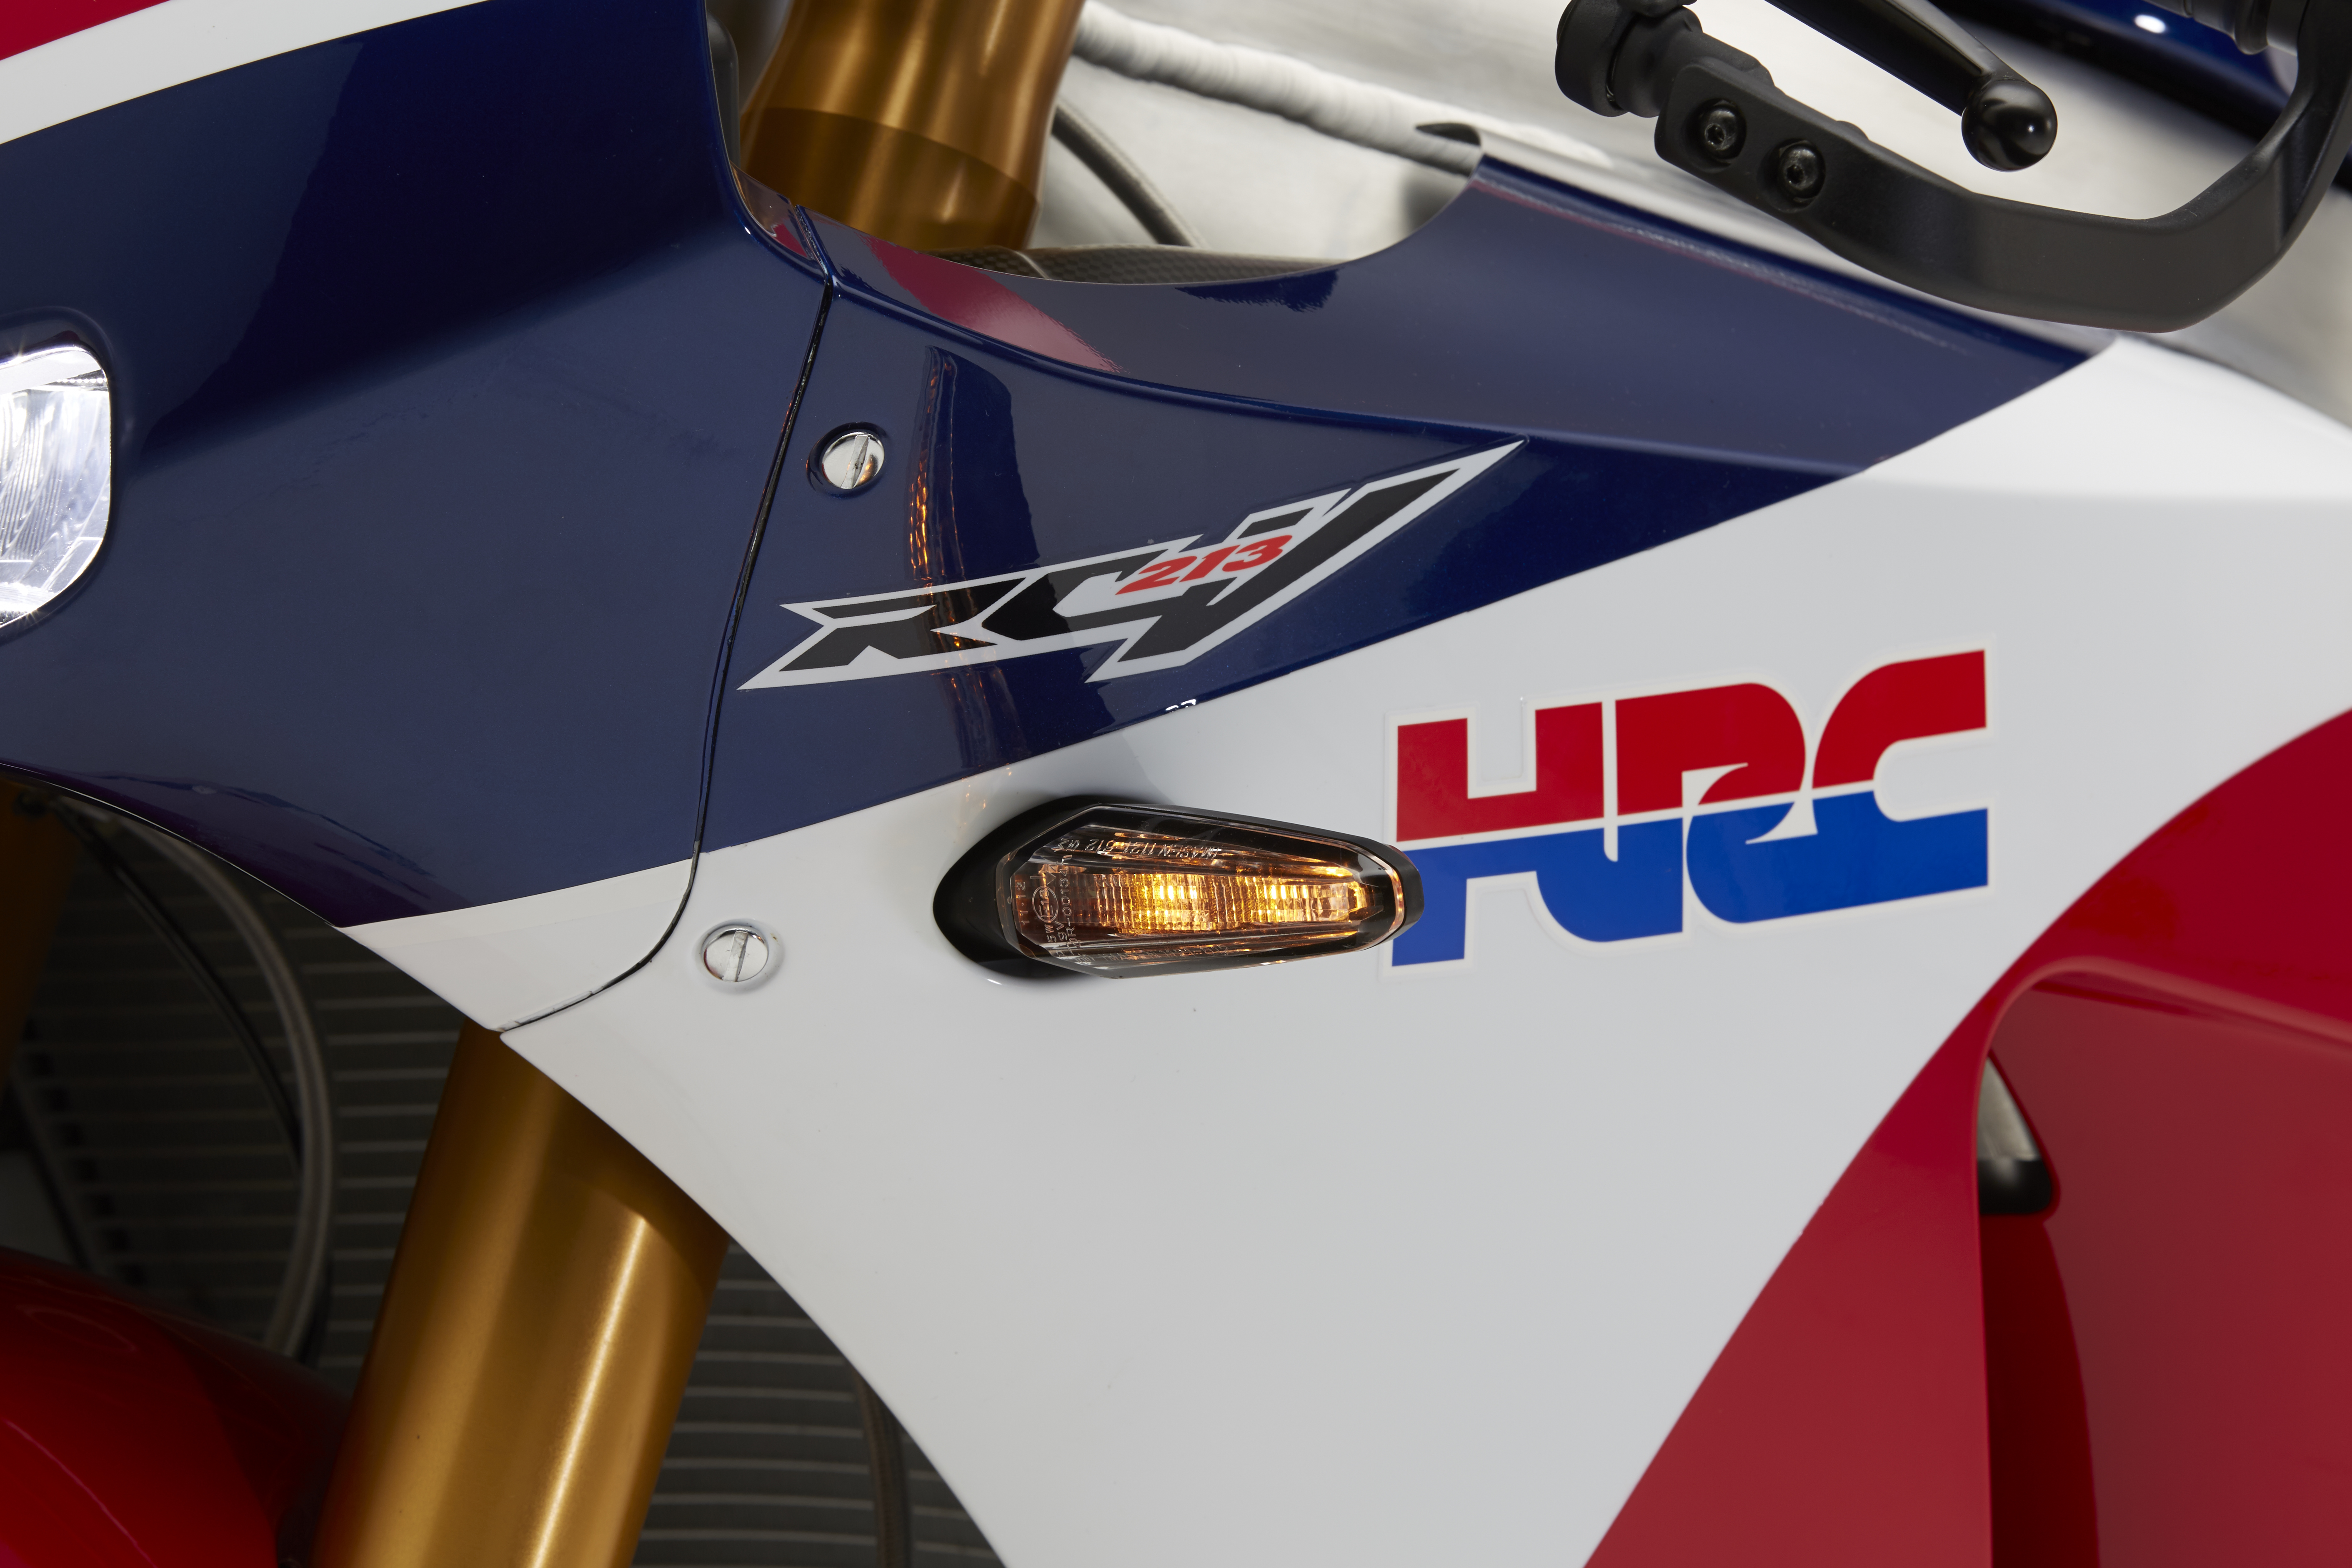 The Honda RC213V-S is here…